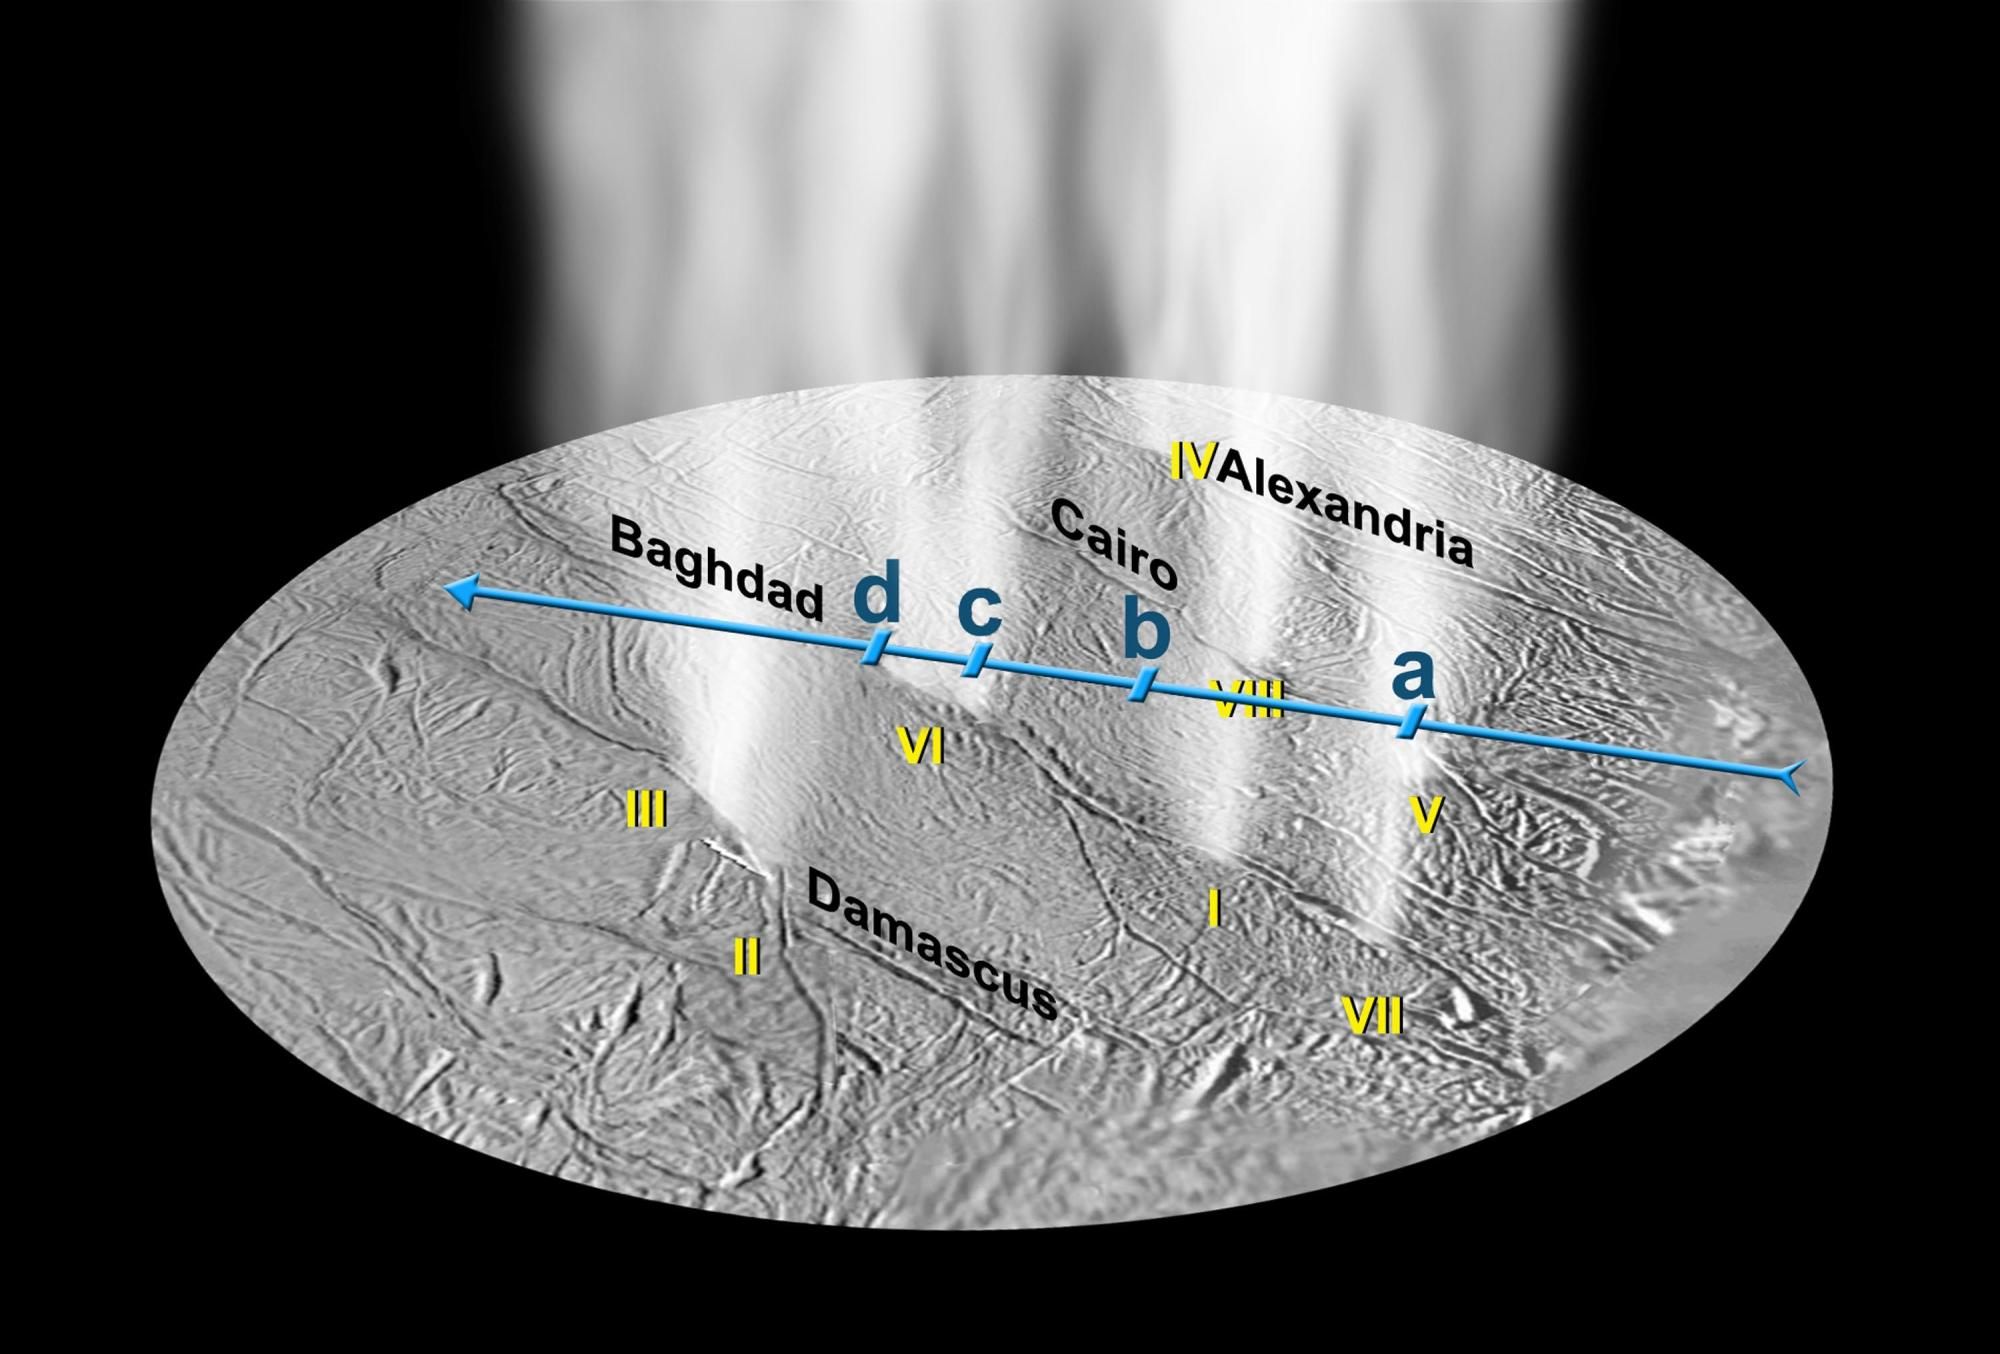 Graphic of jets of high-density gas detected by Cassini on Enceladus